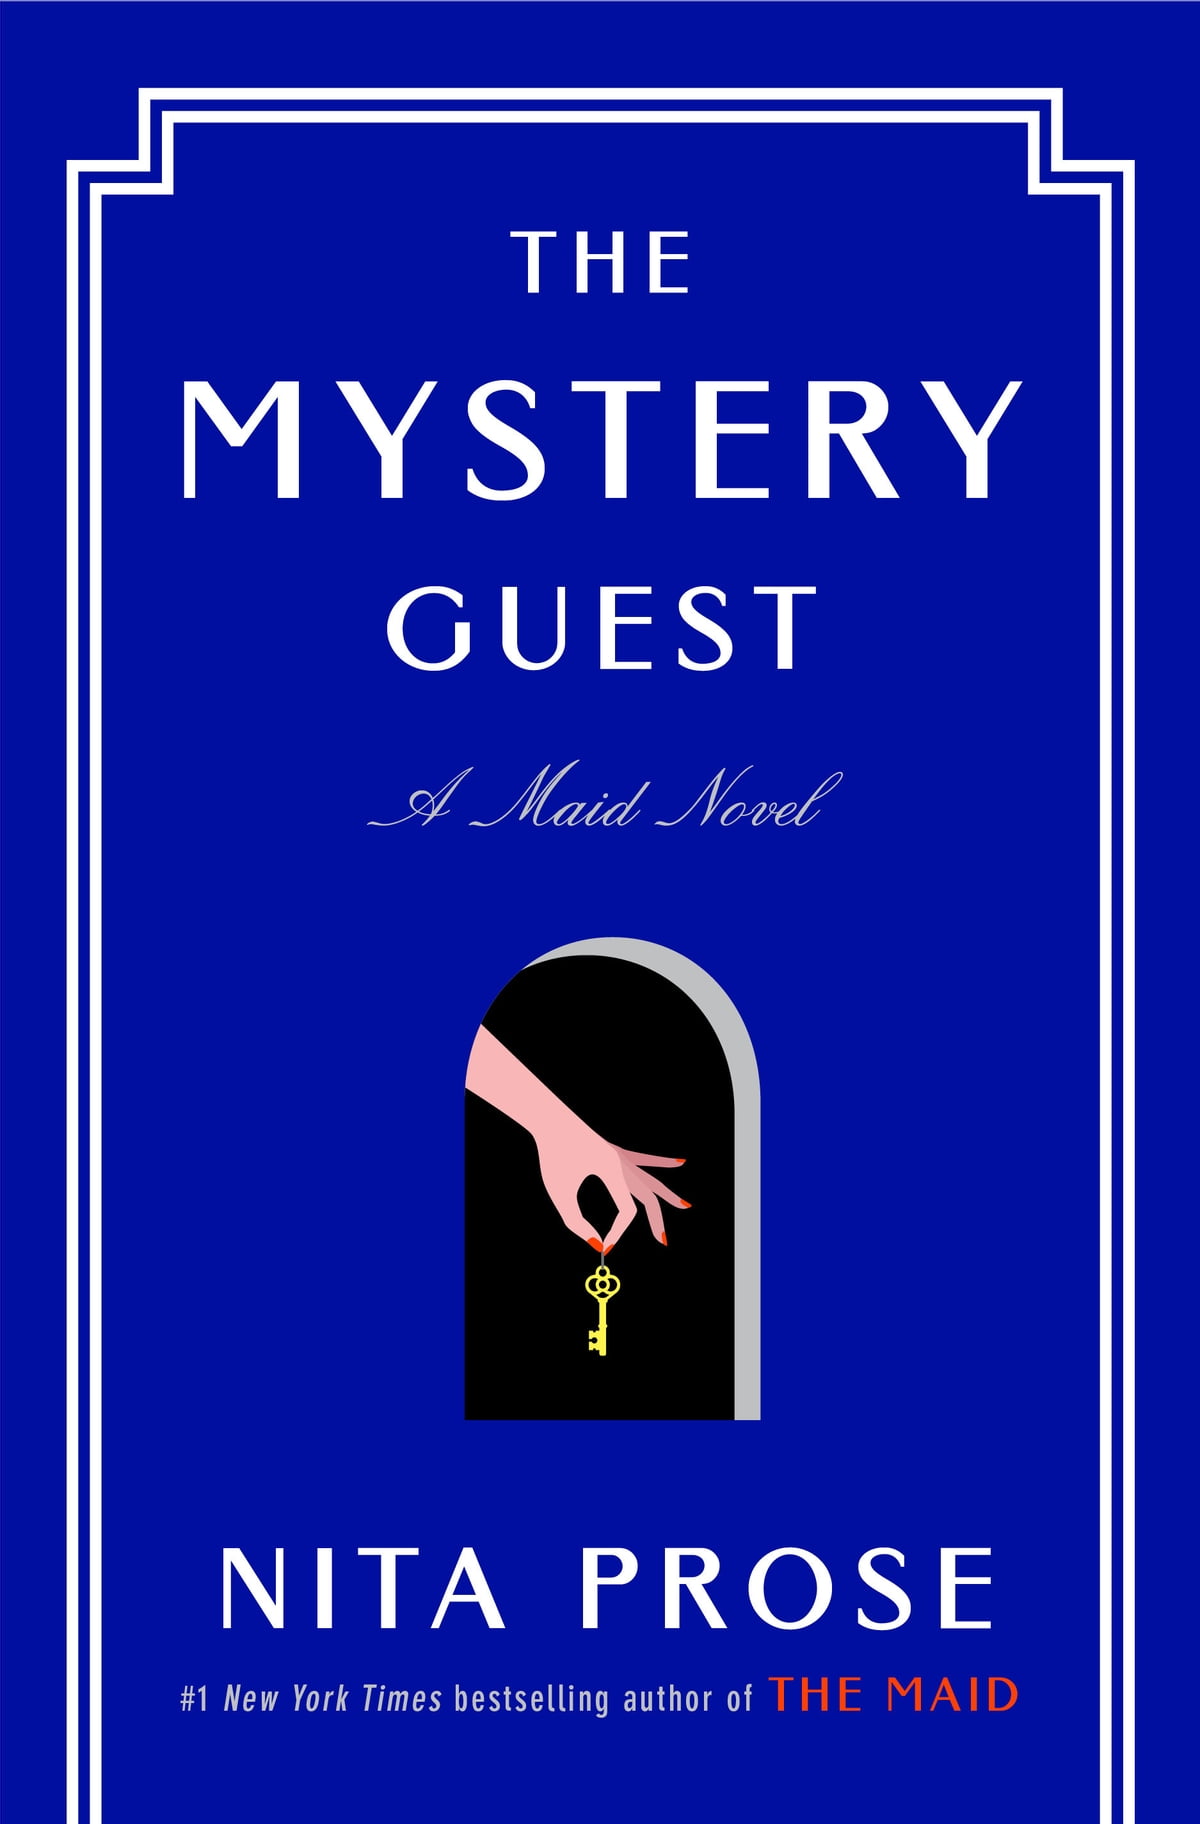 The cover of The Mystery Guest by Nita Prose.